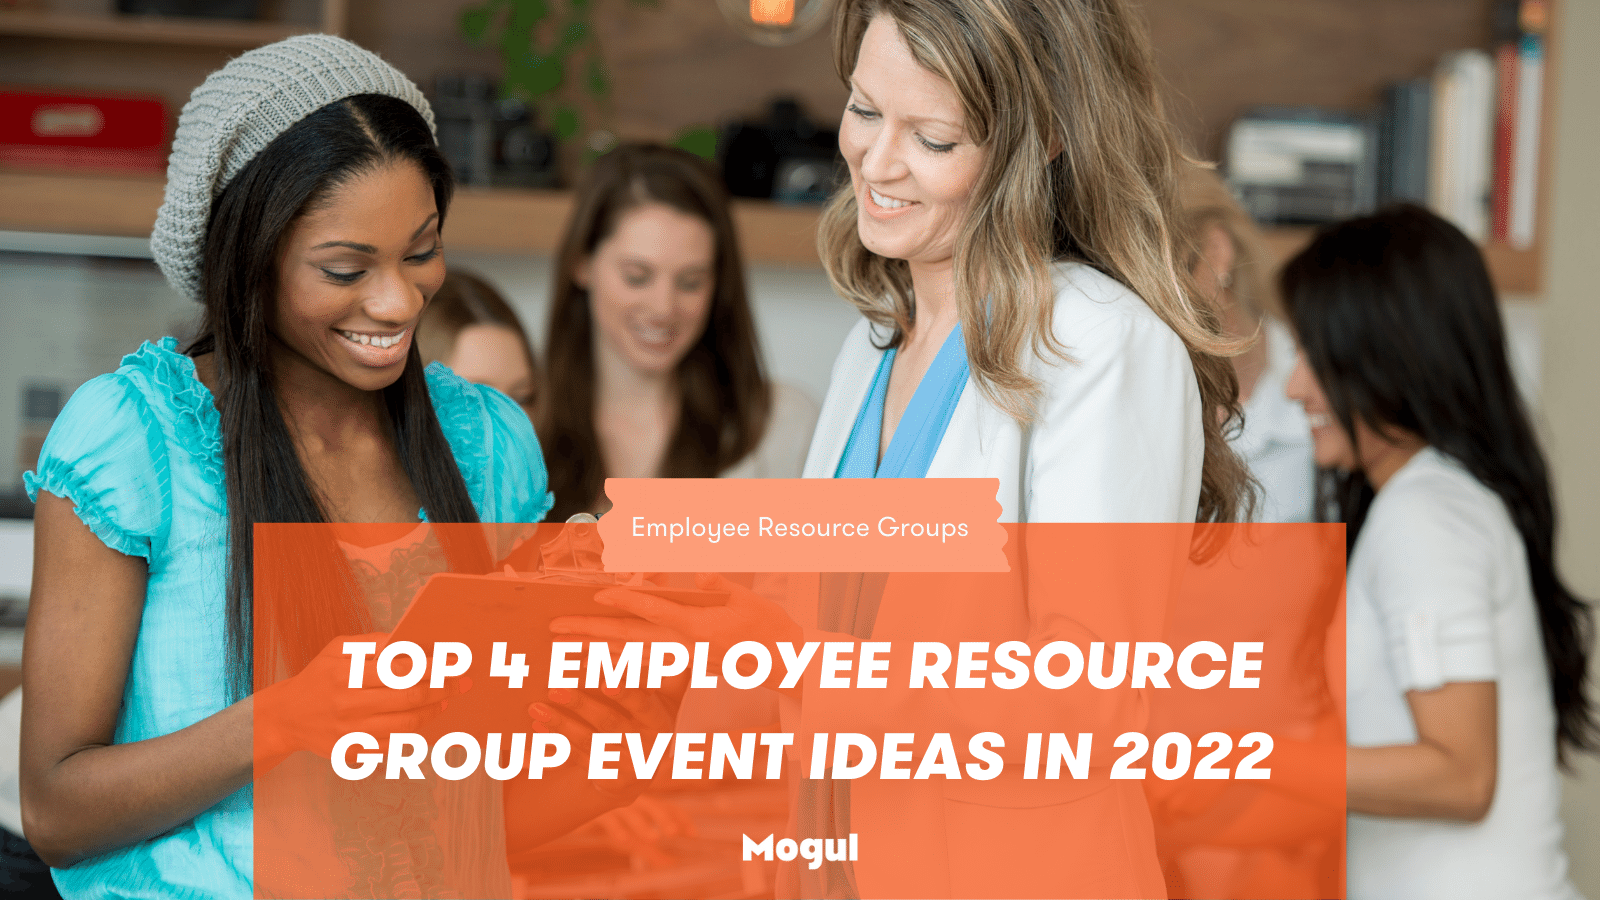 Top 4 Employee Resource Group Event Ideas